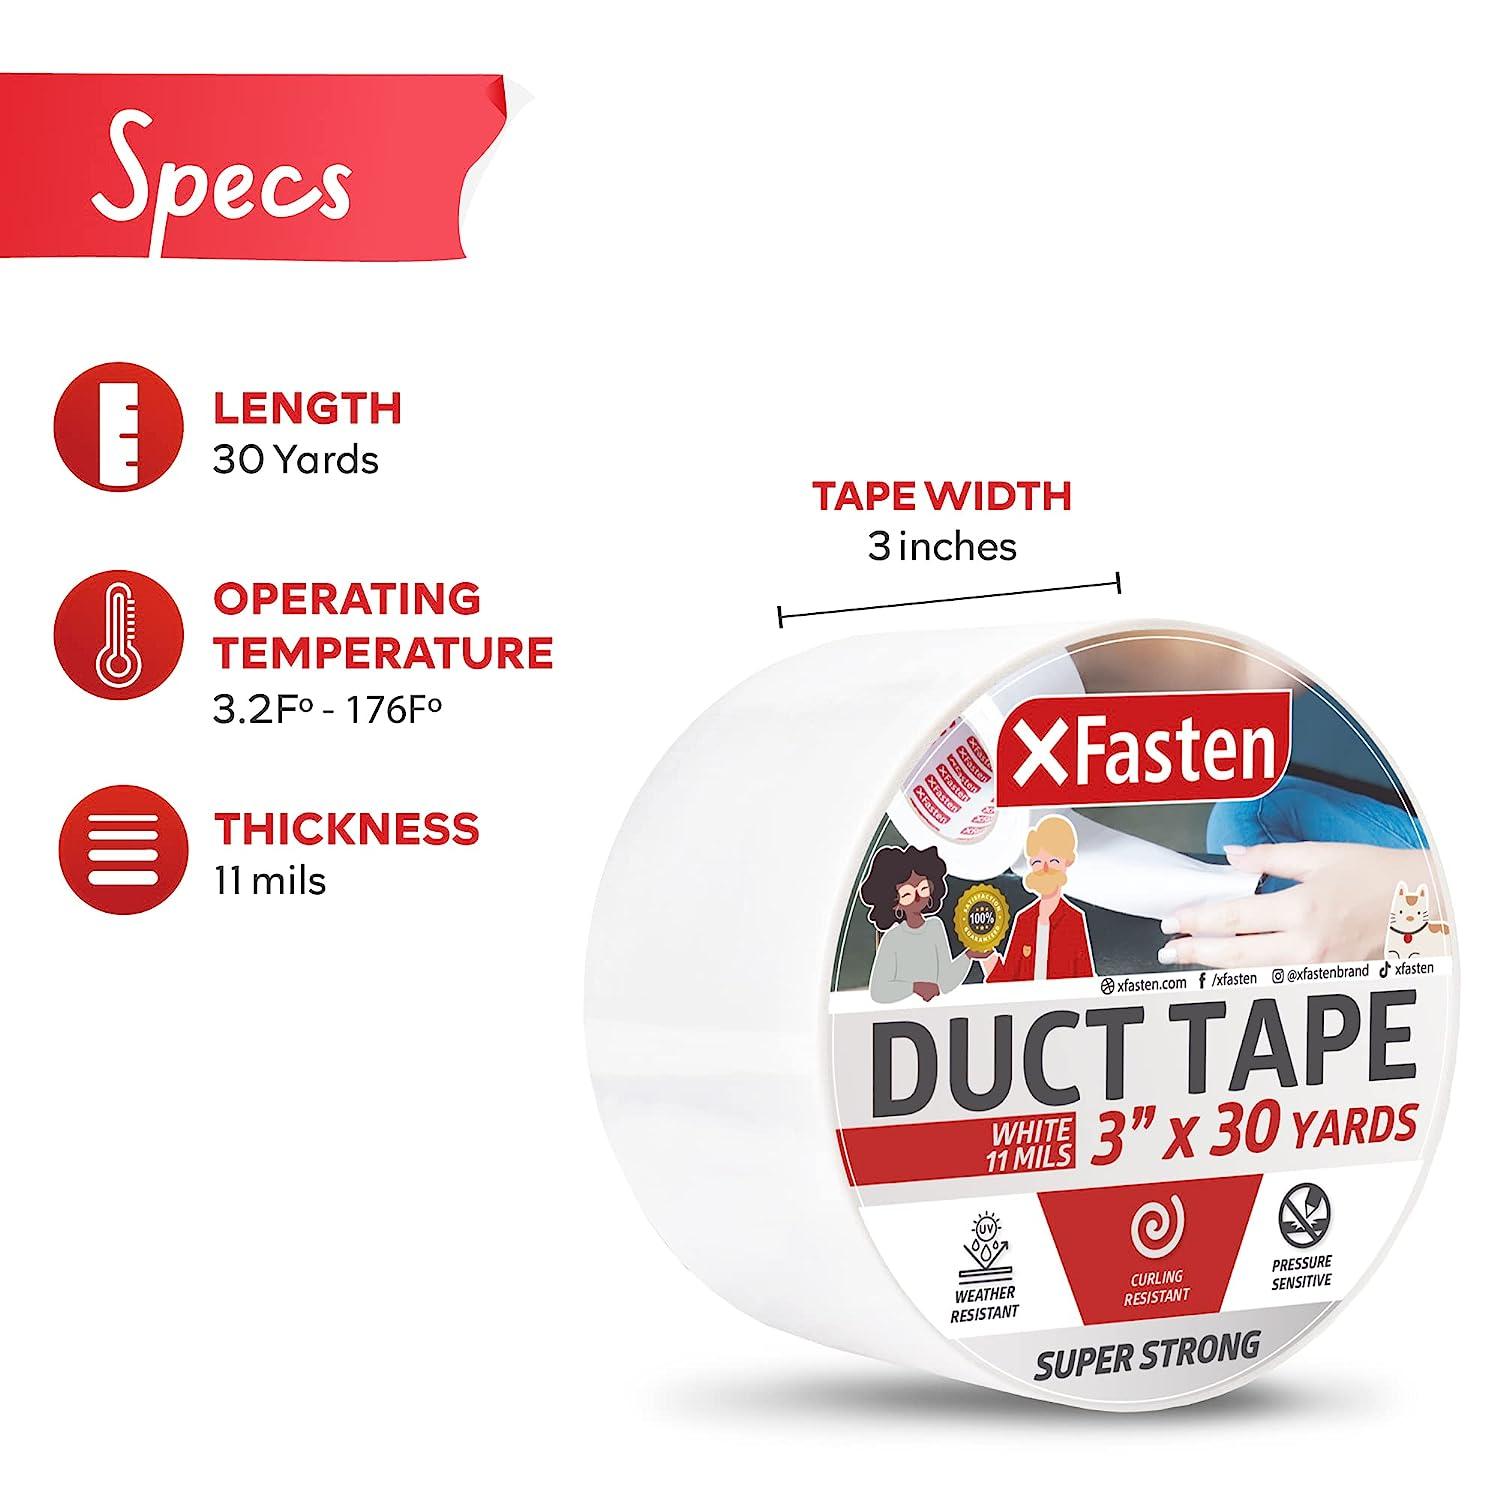 XFasten Super Strong Duct Tape, White, 3 x 30 Yards, Waterproof